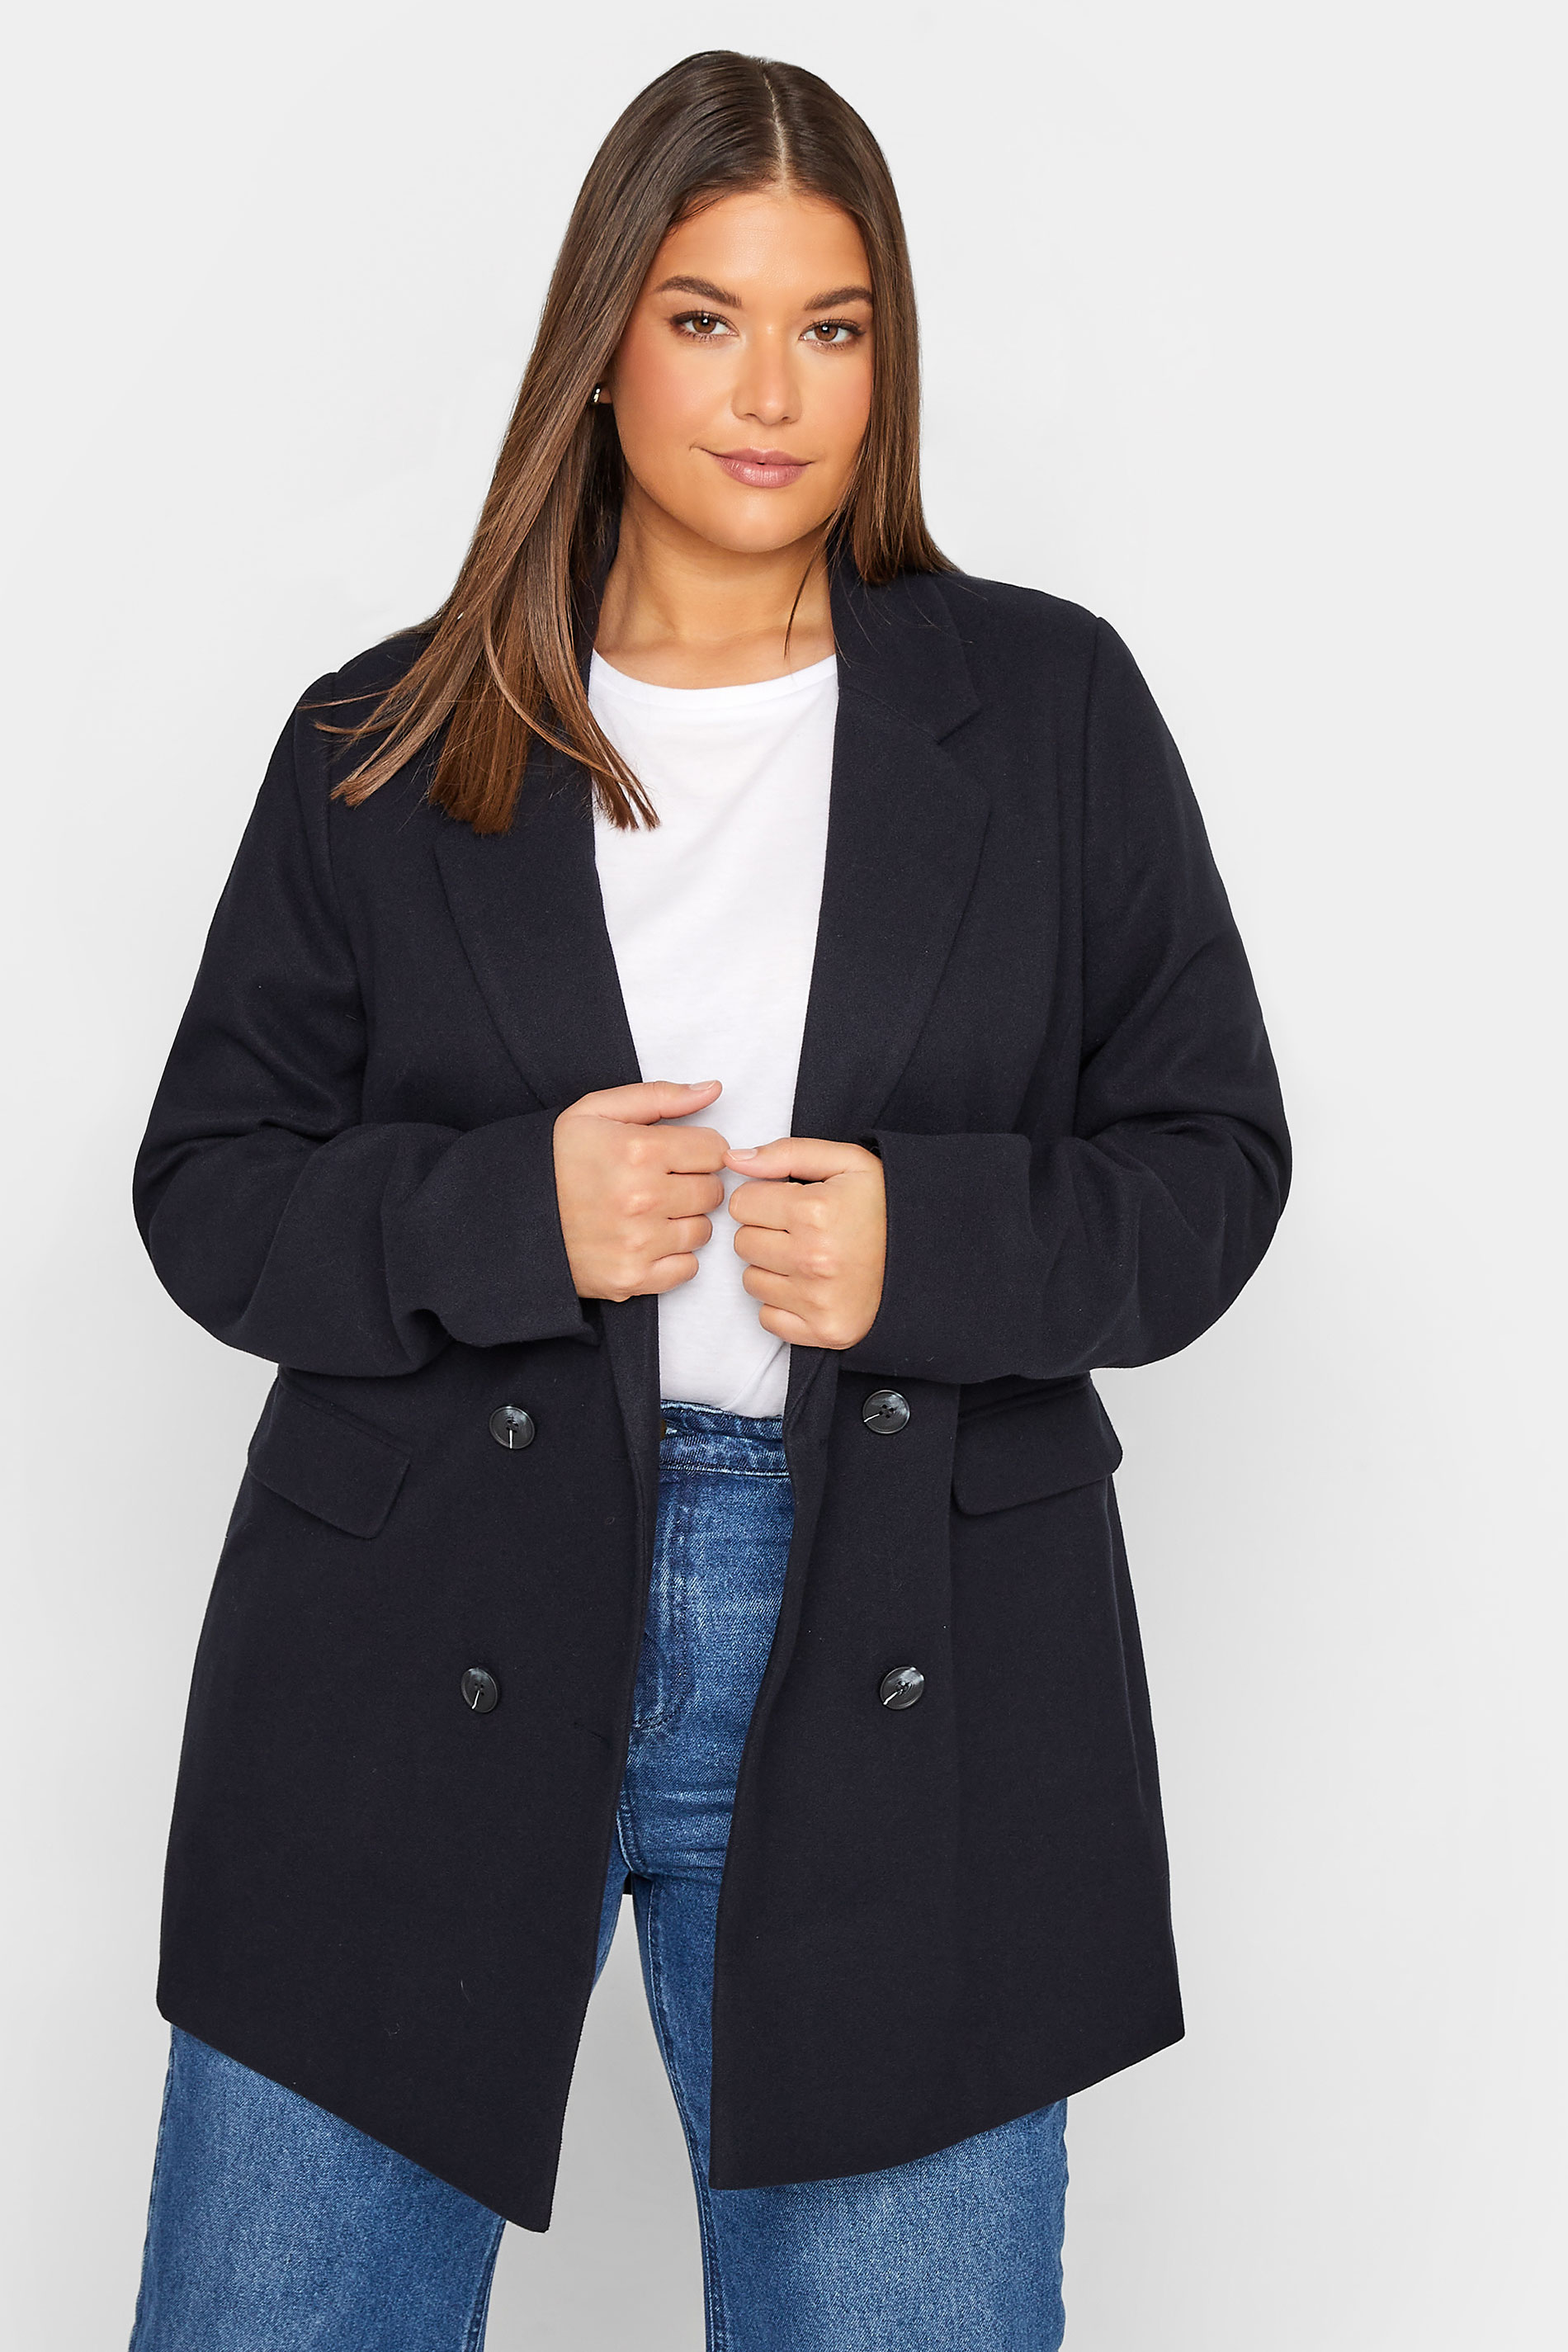 LTS Tall Women's Navy Blue Double Breasted Brushed Jacket | Long Tall Sally 1